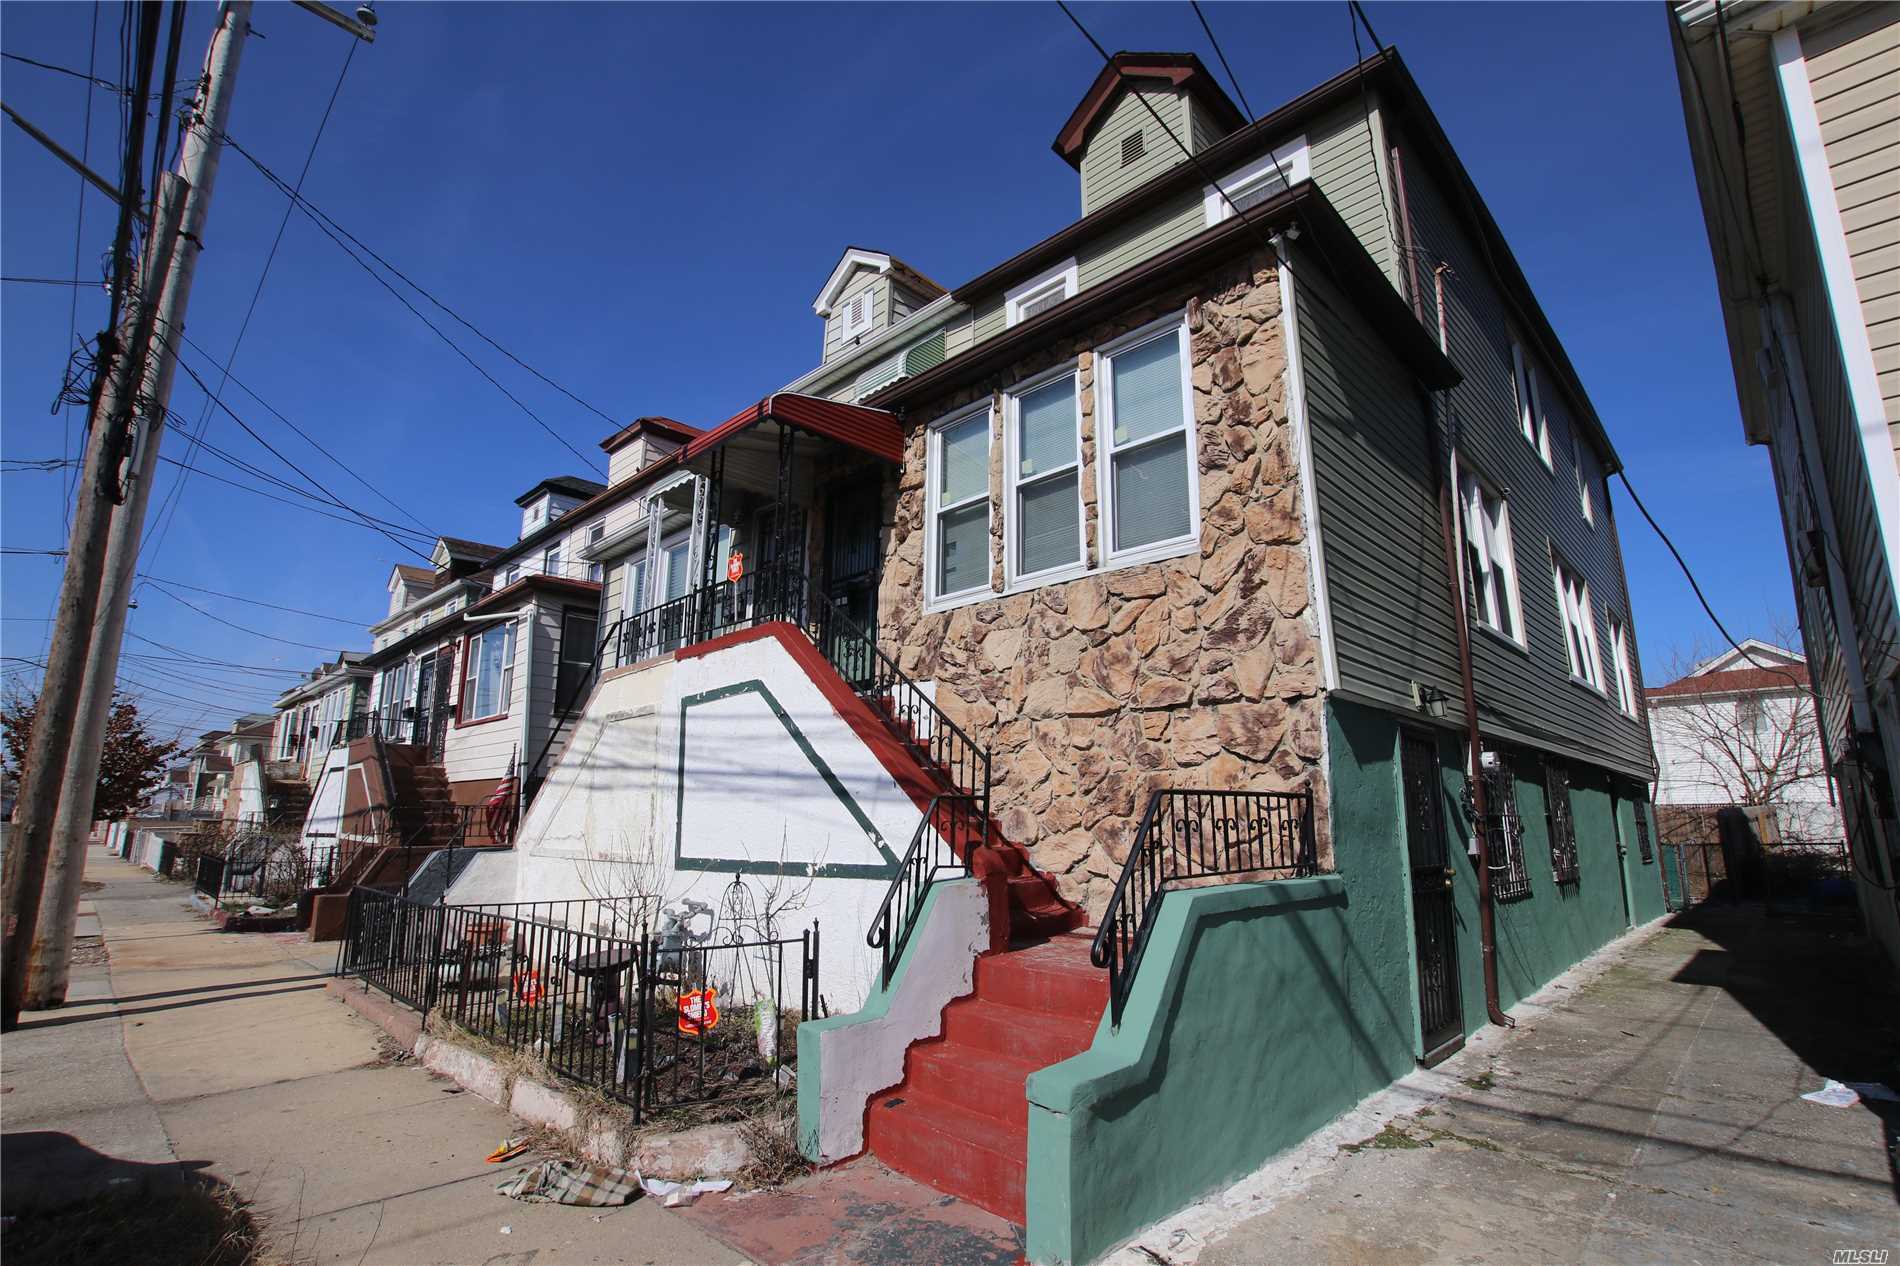 Great Semi-Detached House In The Rockaways, This Area Is Heavily Up And Coming. Imagine Living Steps From The Beach And Wildlife Sanctuary&rsquo;s. Act Fact Before This House Sells.